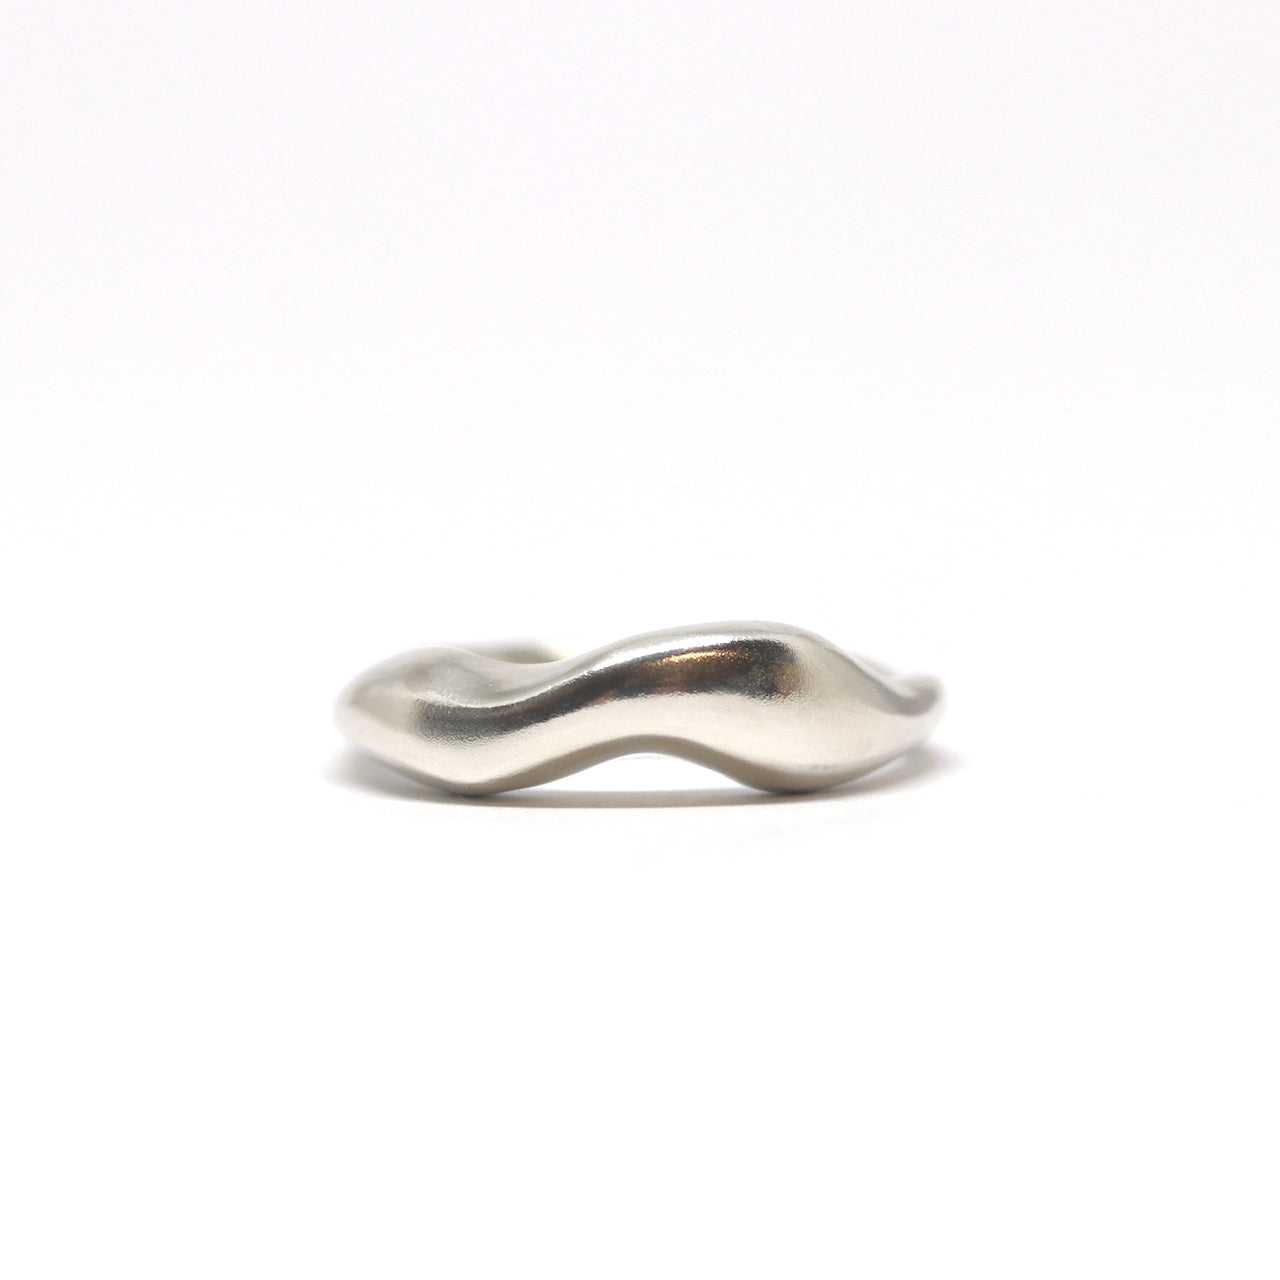 A wavy, mountain sterling silver ring. This ring was hand made in Wānaka, New Zealand by designer and jeweller Briar Hardy-Hesson.